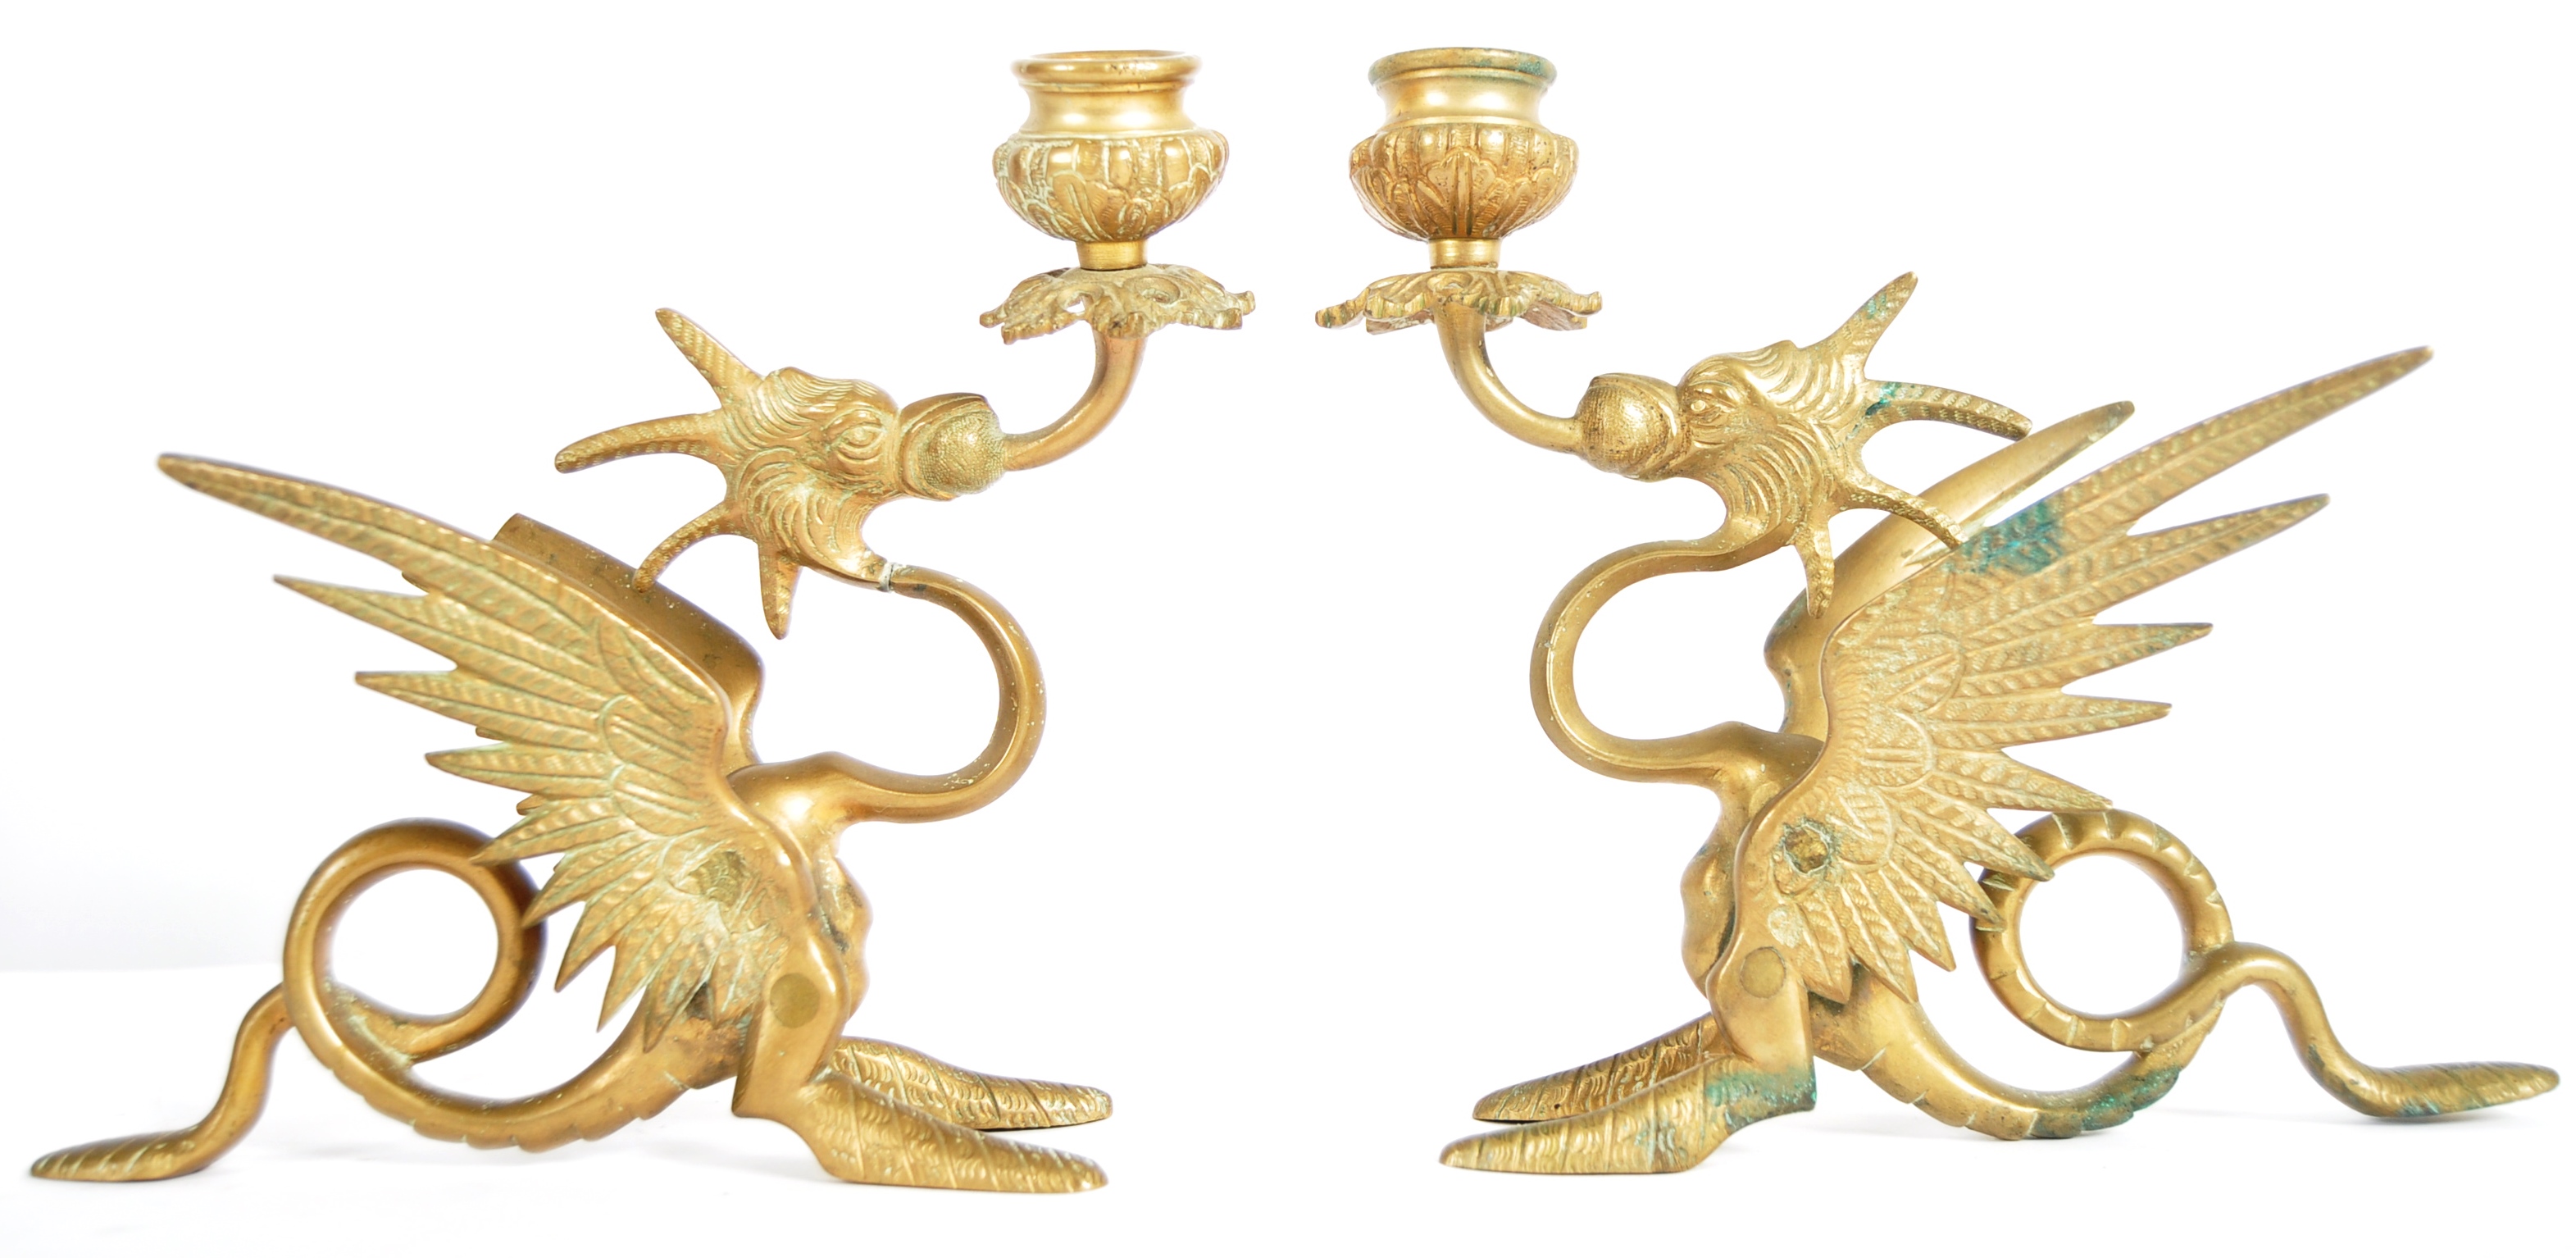 PAIR OF 19TH CENTURY BRASS GRIFFIN CANDLESTICKS - Image 2 of 7